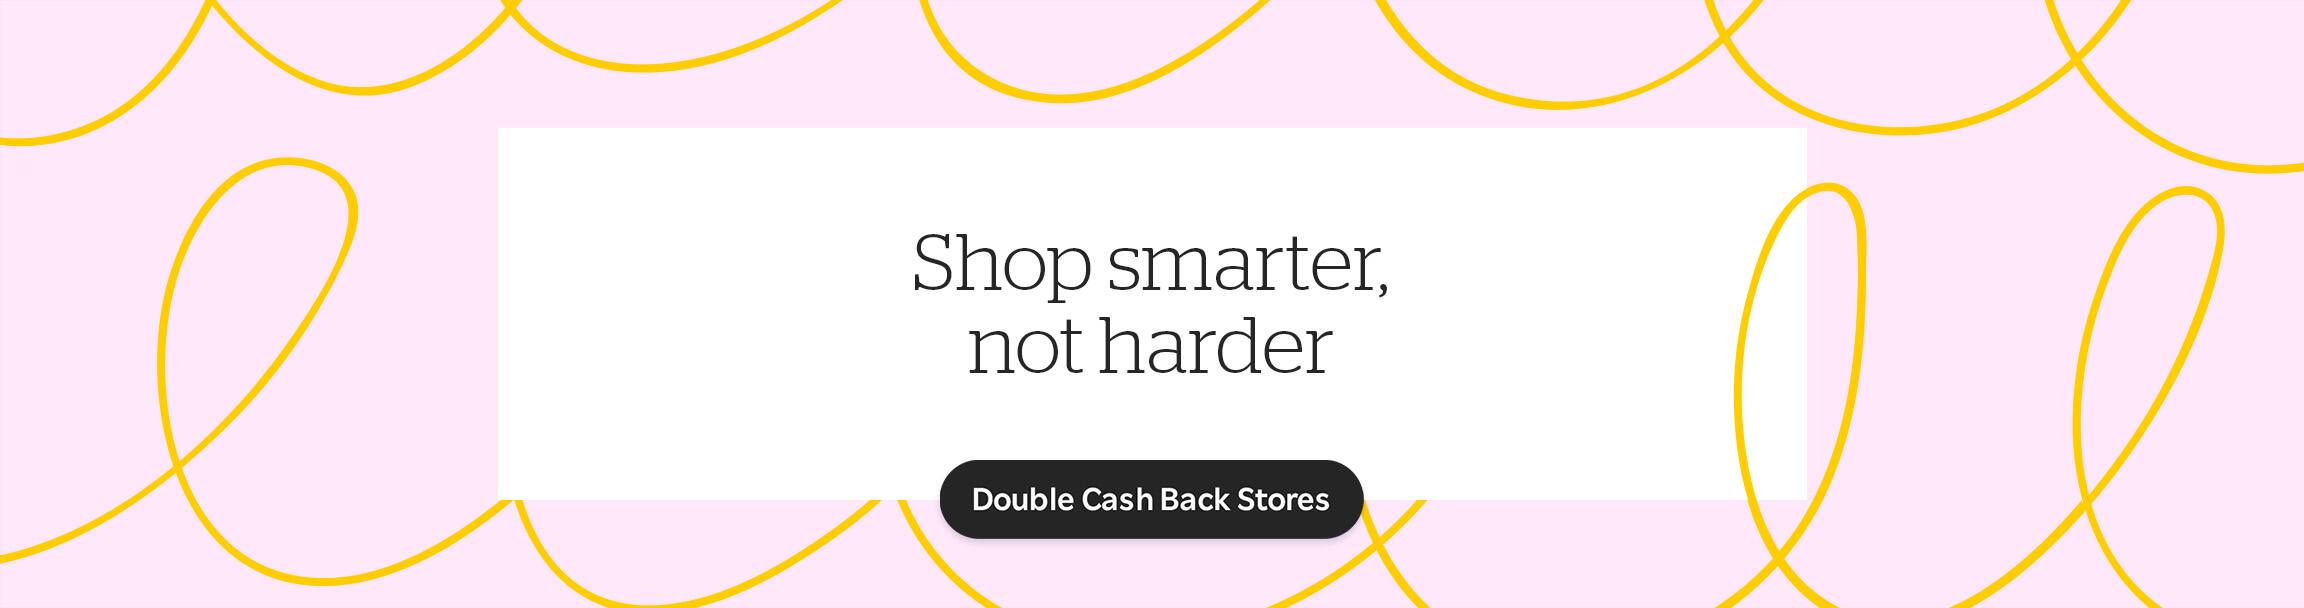 Save with Rakuten coupons and Cash Back